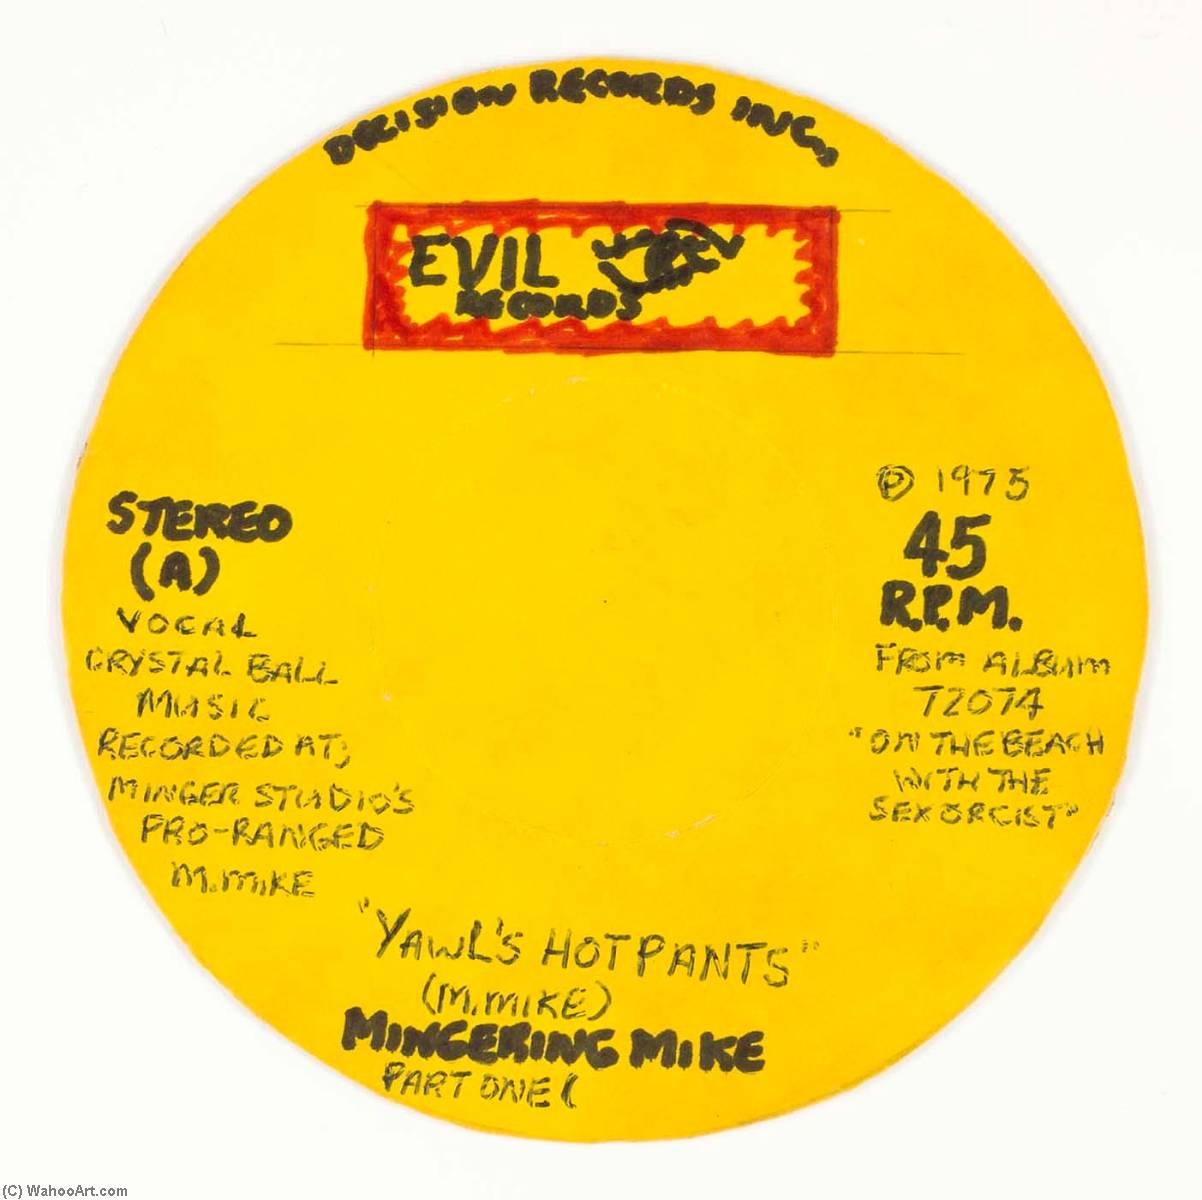 Wikioo.org - สารานุกรมวิจิตรศิลป์ - จิตรกรรม Mingering Mike - EVIL (EYE) RECORDS YAWL'S HOT PANTS PART ONE